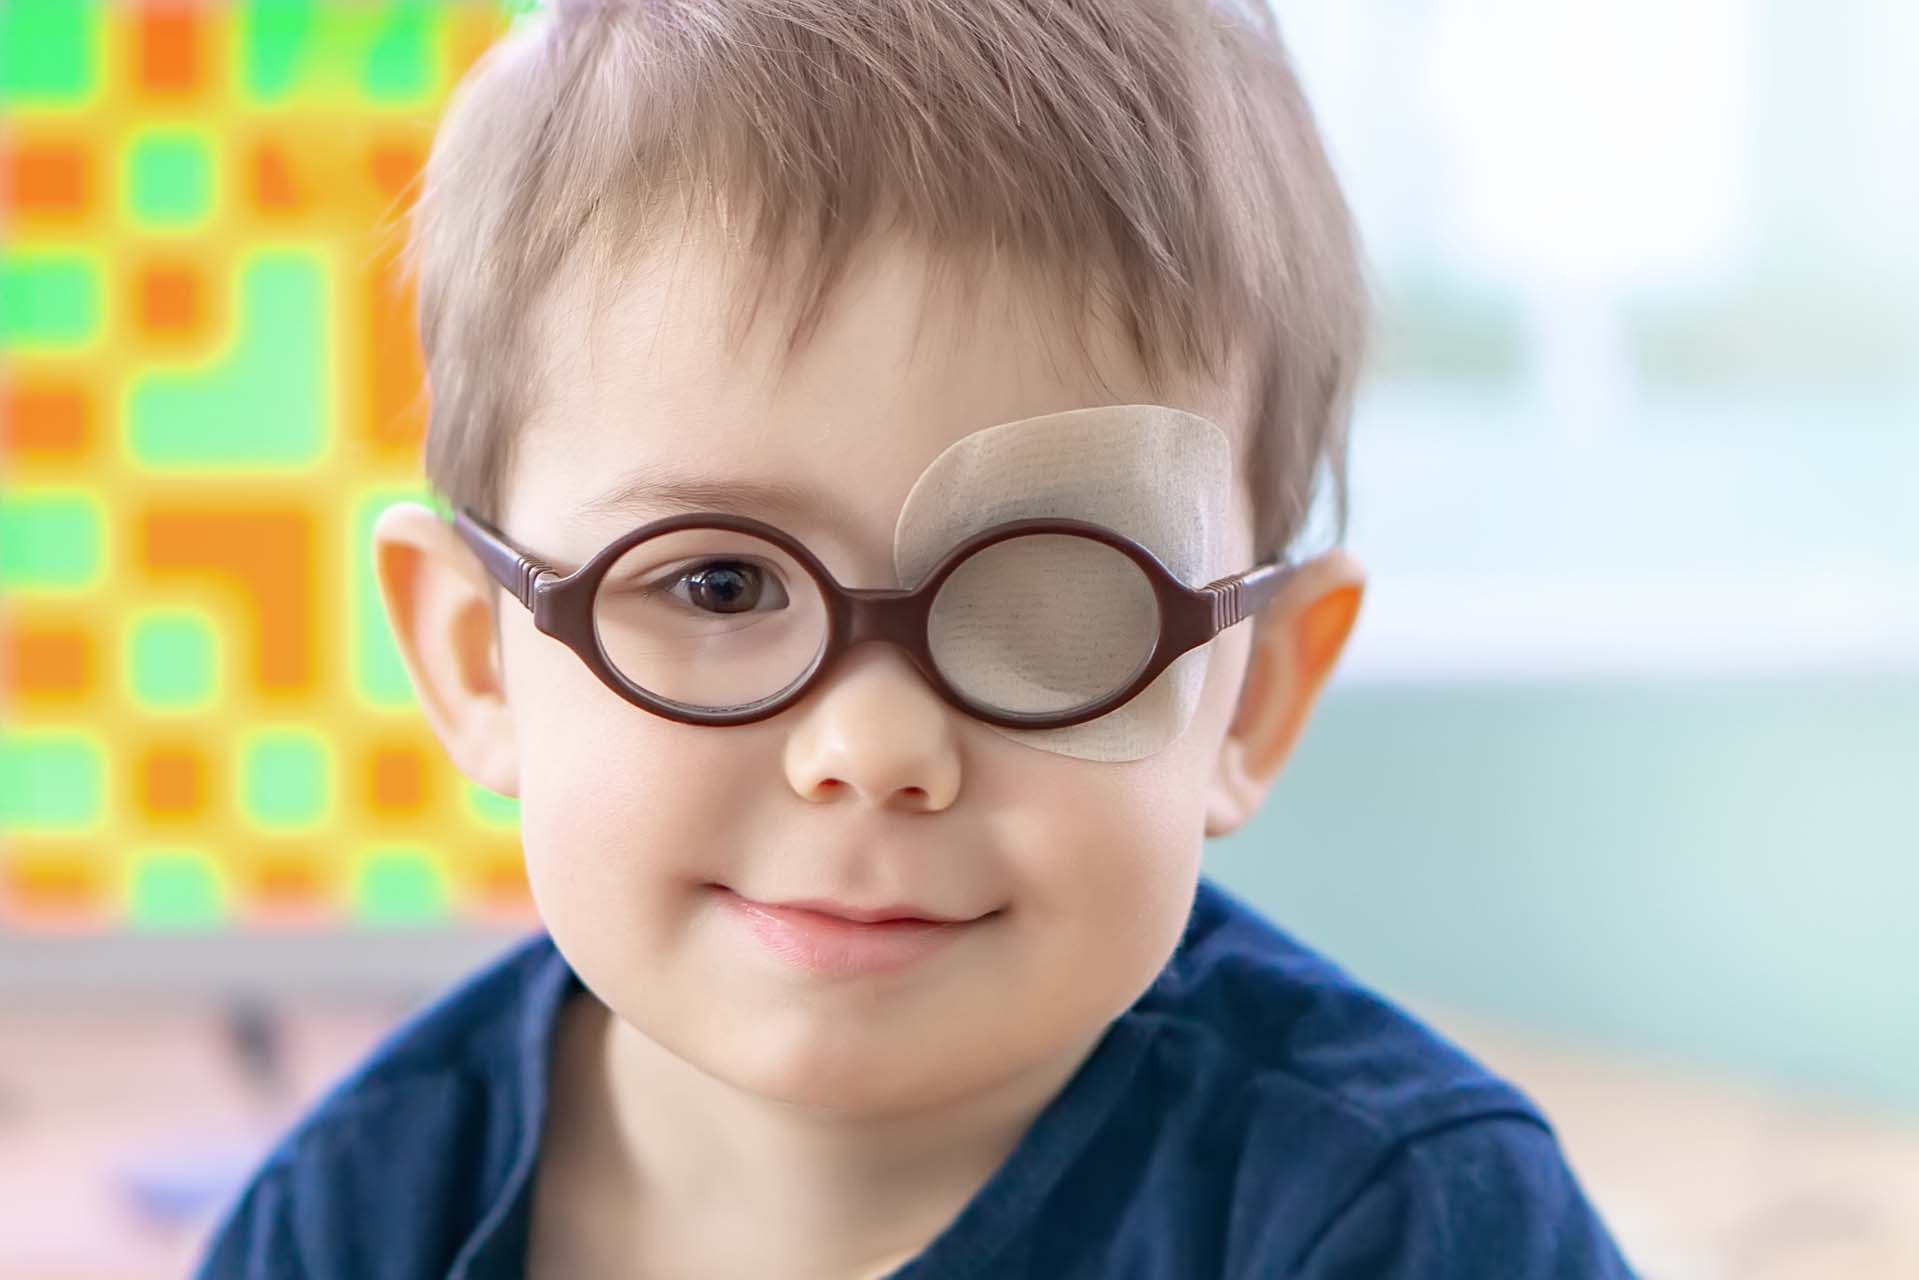 A little boy wearing glasses and an eye patch (plaster, occluder) undergoes a hardware vision treatment to prevent amblyopia and strabismus (squint, lazy eye). Child congenital vision disease problem